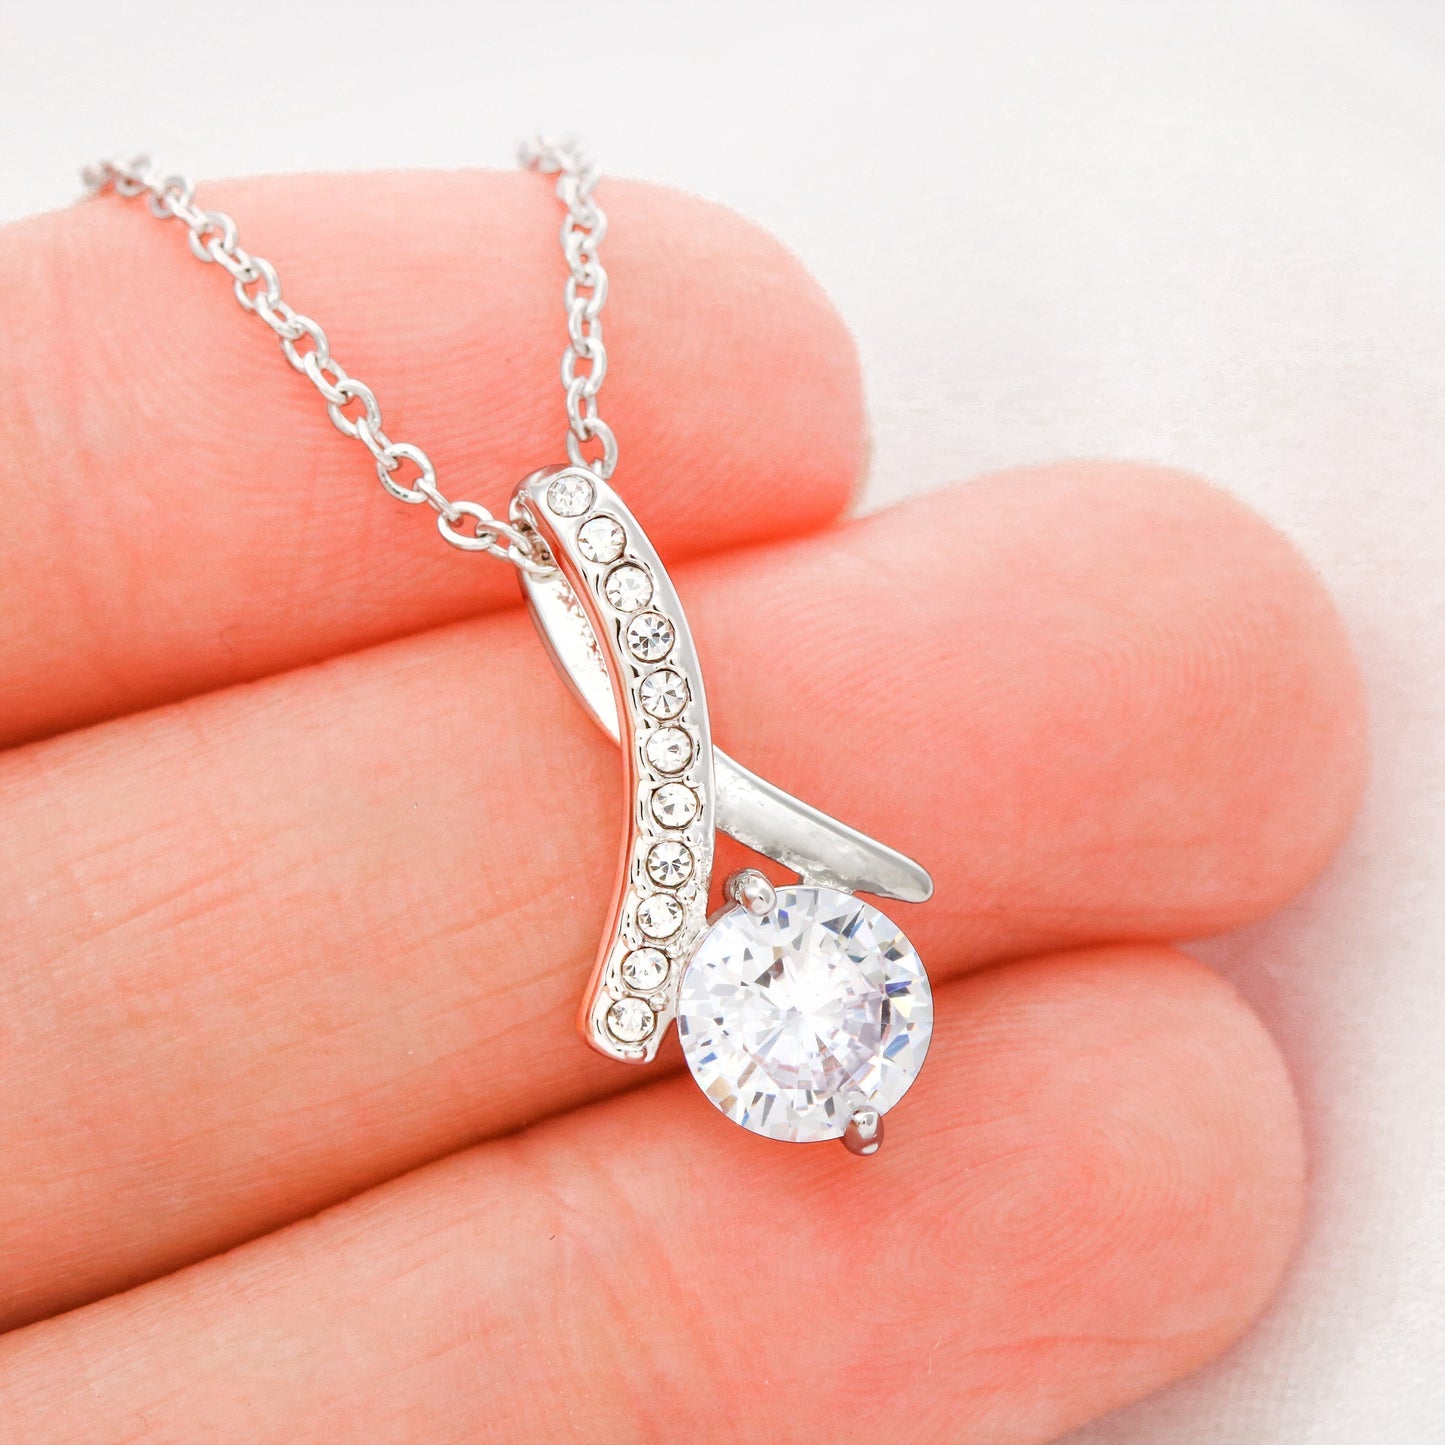 To My Wife - Partners In Crime - 925 Sterling Silver Pendant